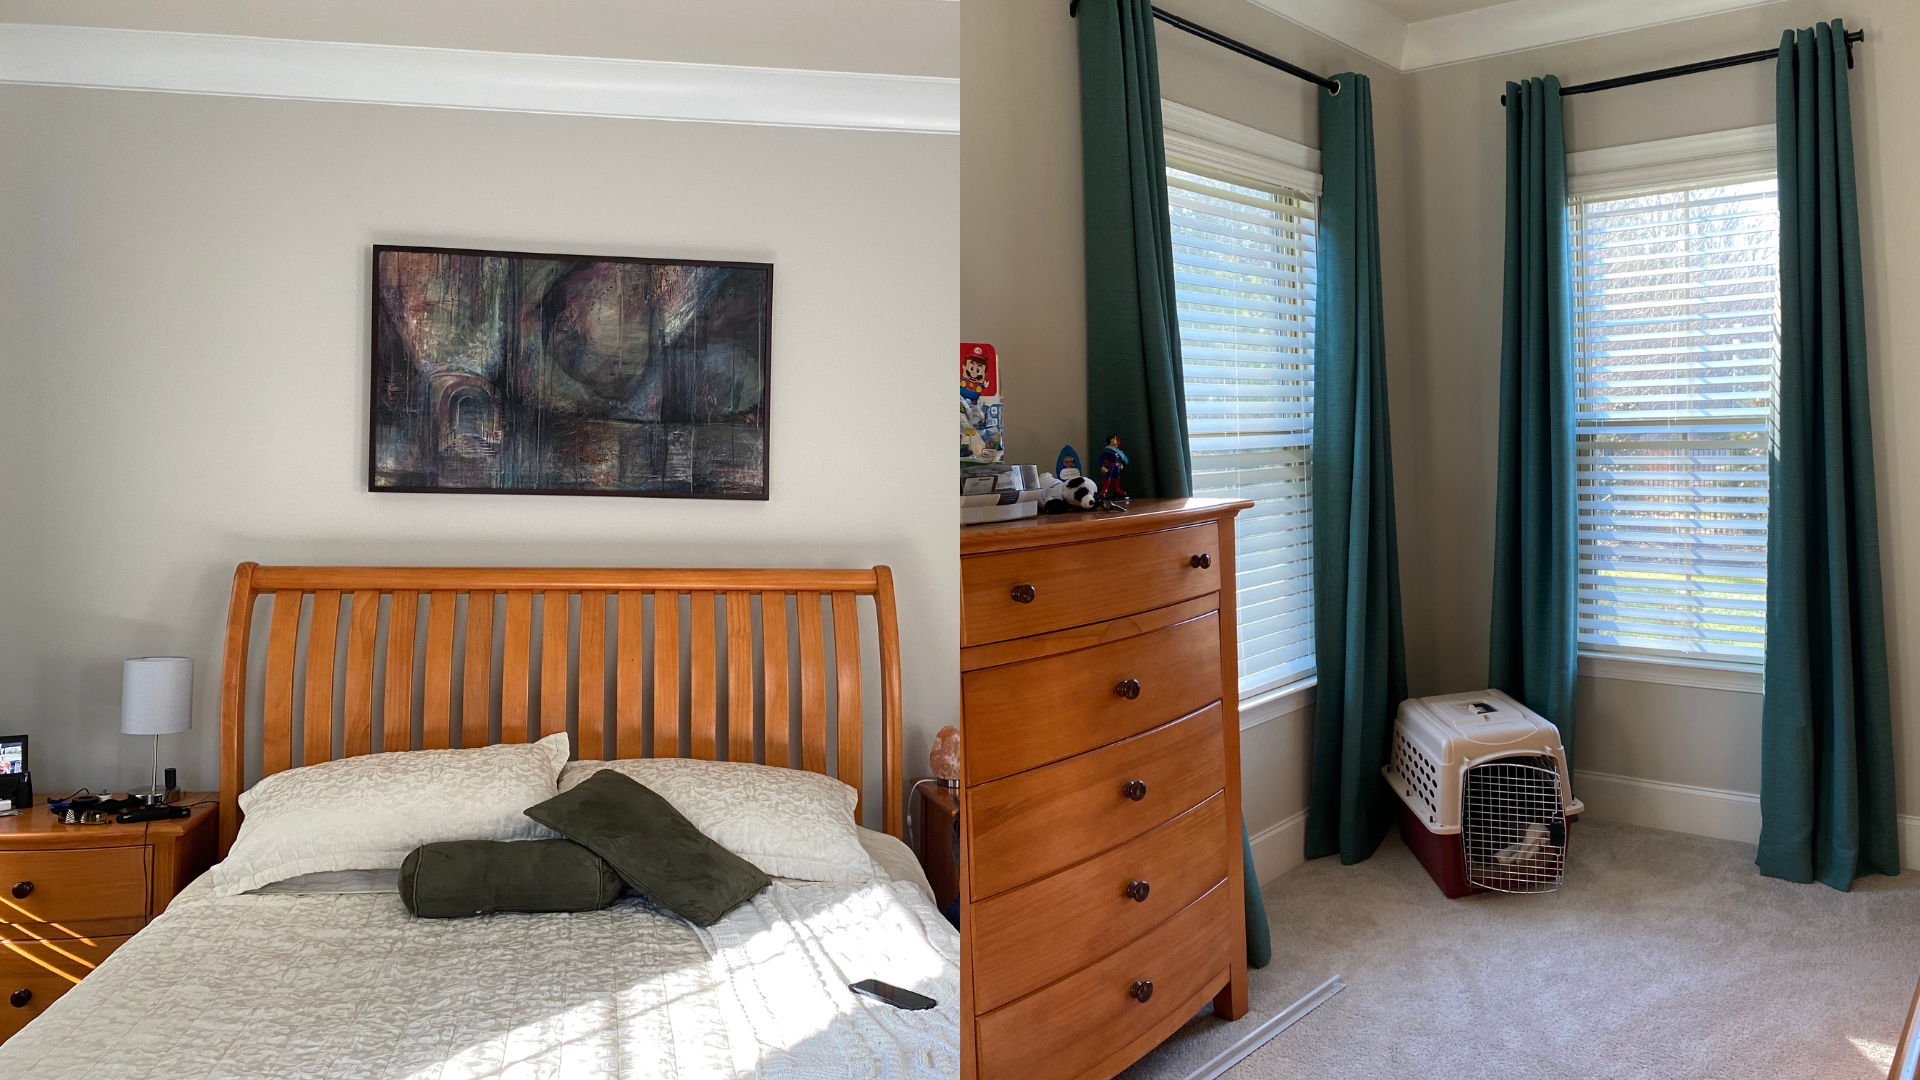 Master Bedroom Makeover with a Bold Accent Wall